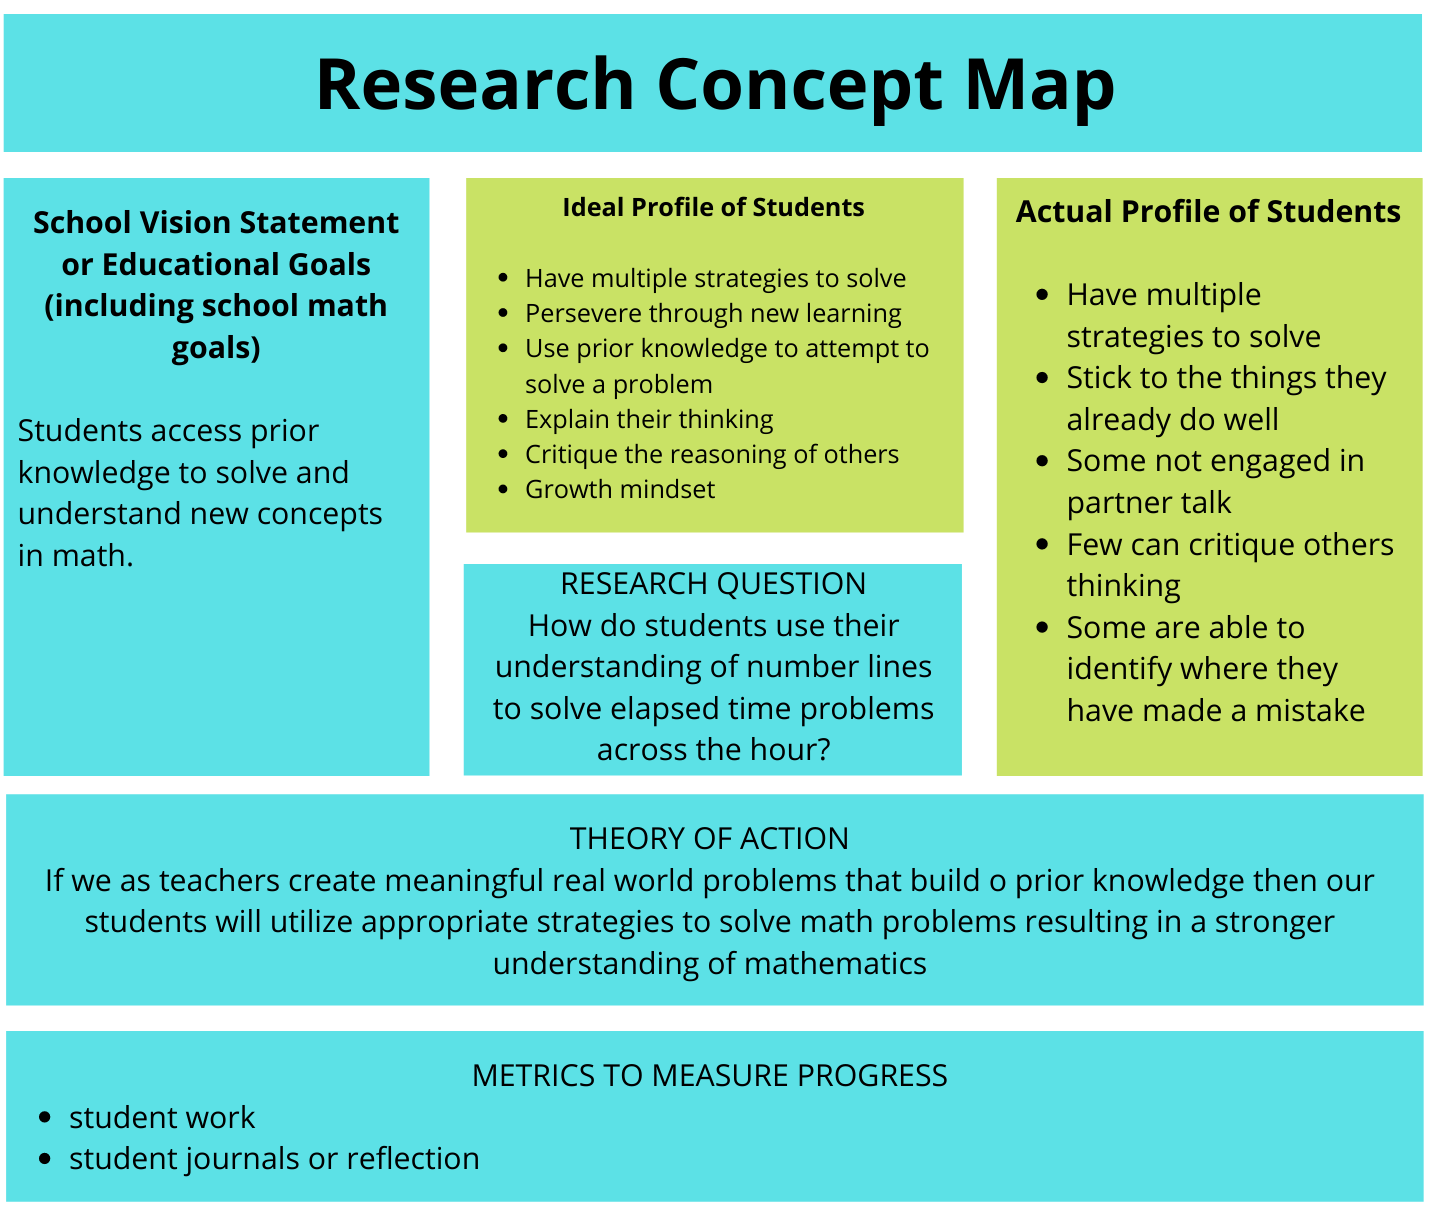 research design concept and types